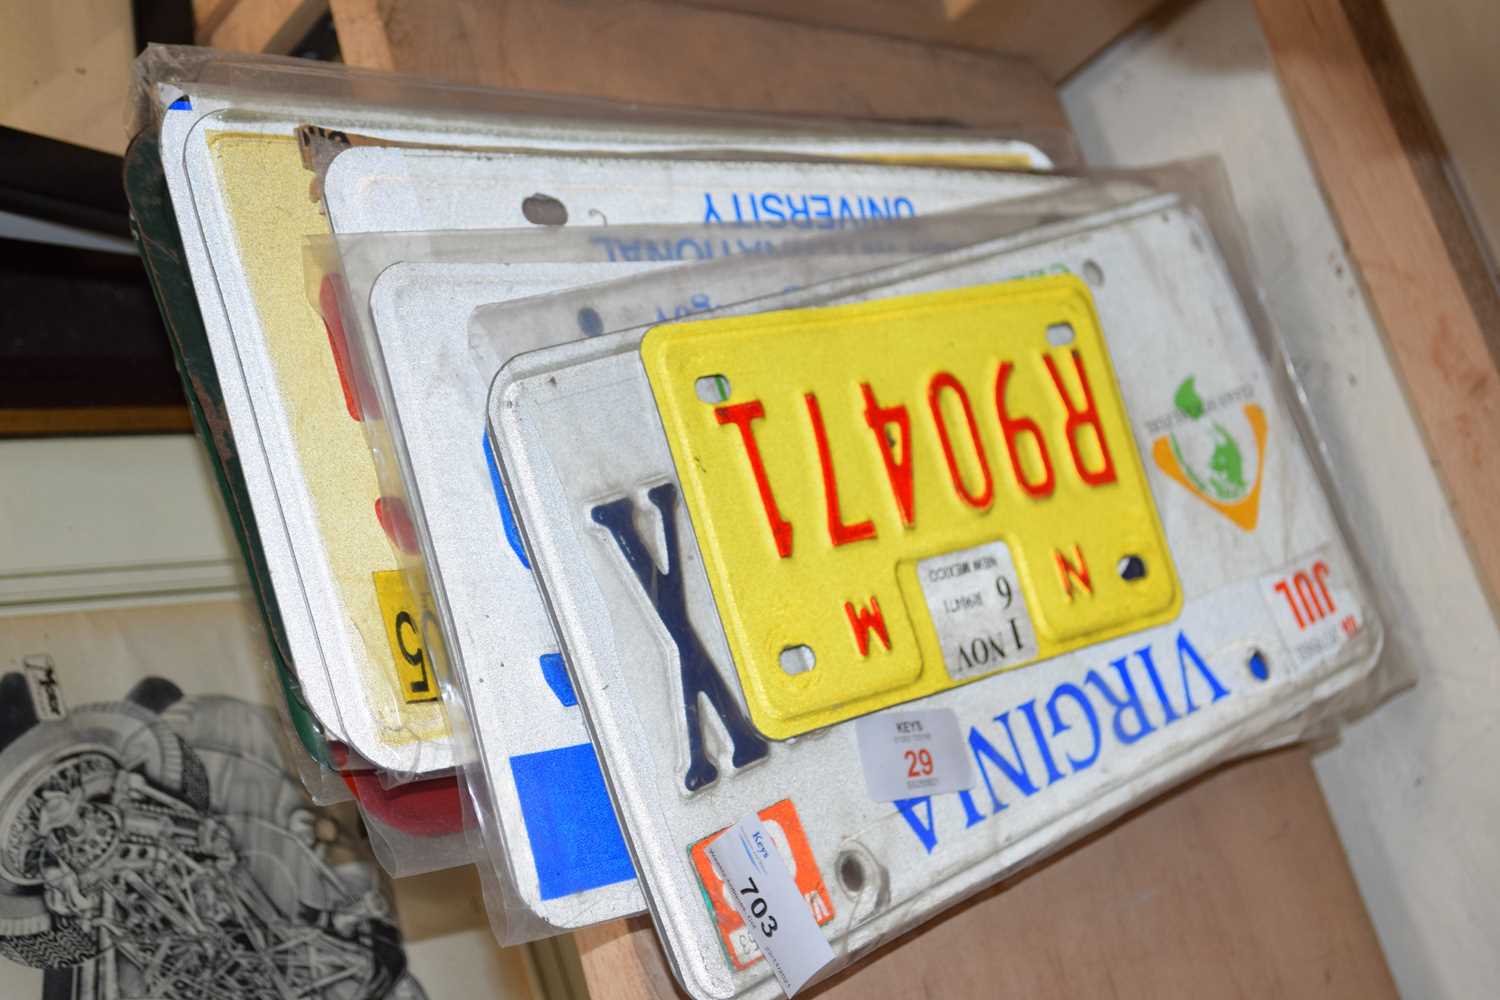 COLLECTION OF VARIOUS AMERICAN CAR NUMBER PLATES